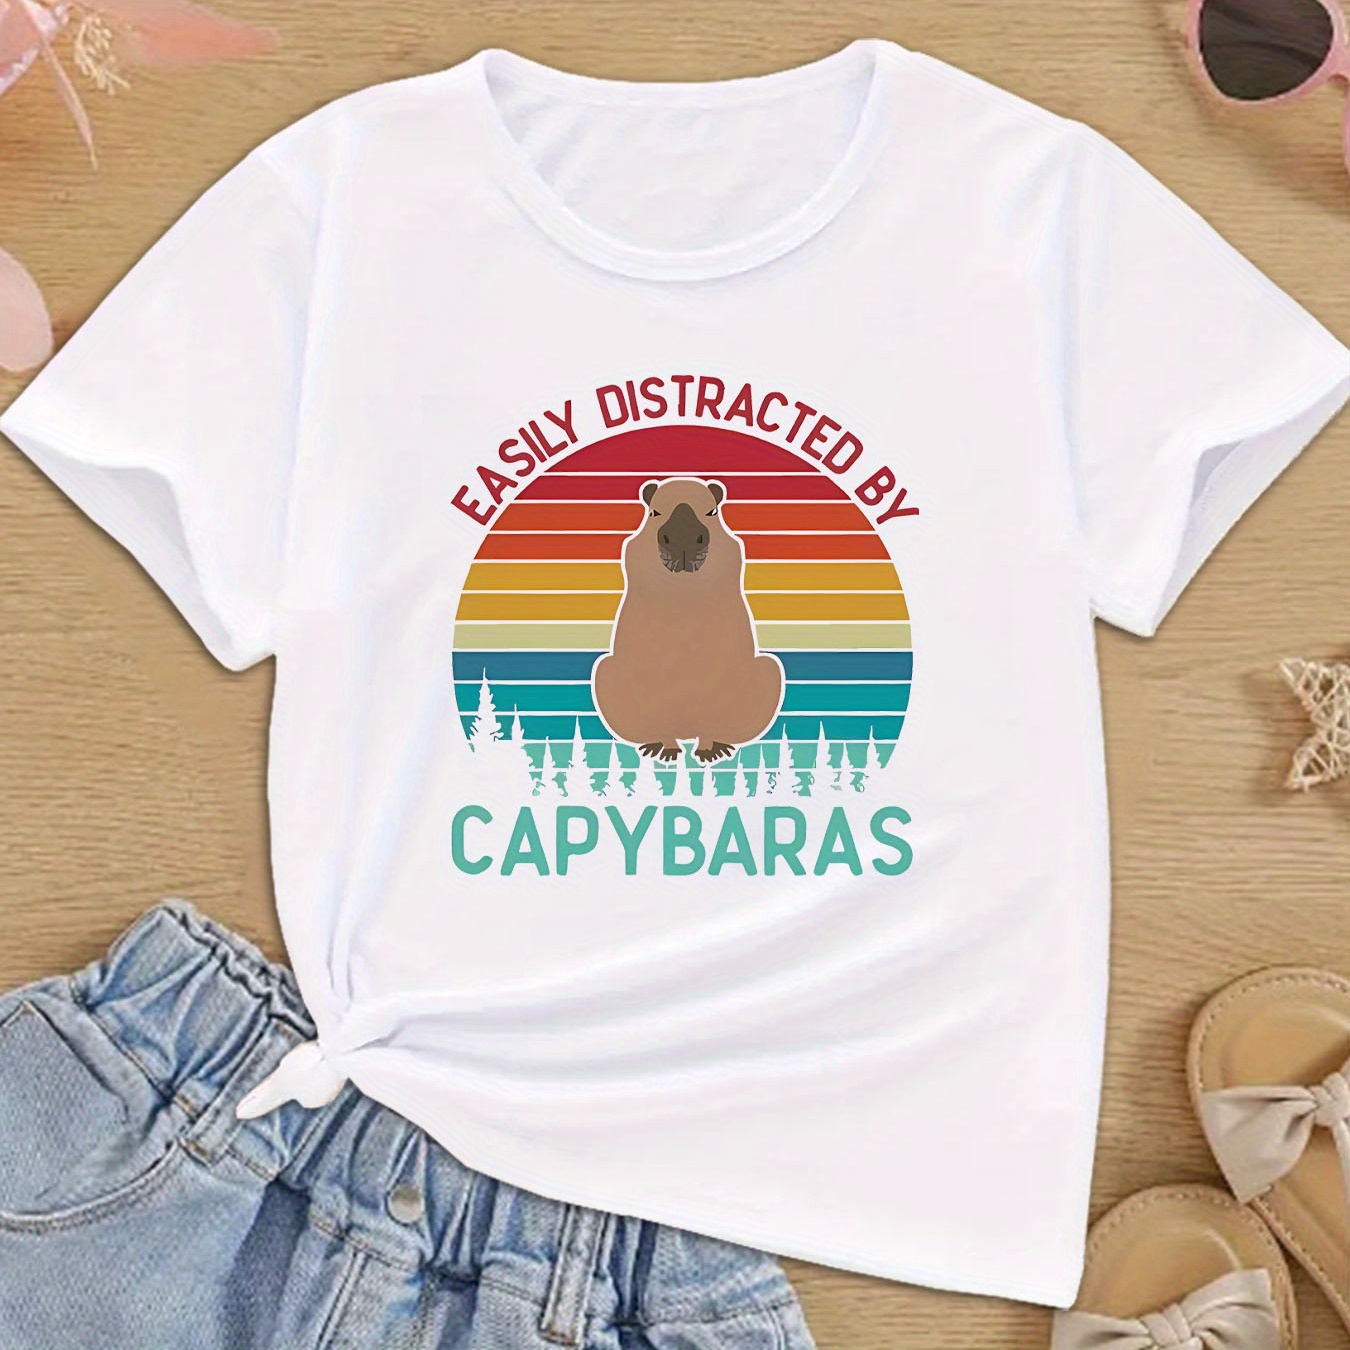 

Girls' Summer Fashion Casual Easily Distracted By Capybaras Letter Printed T-shirt, Short Sleeve Round Neck Top With Trendy Graphic Design